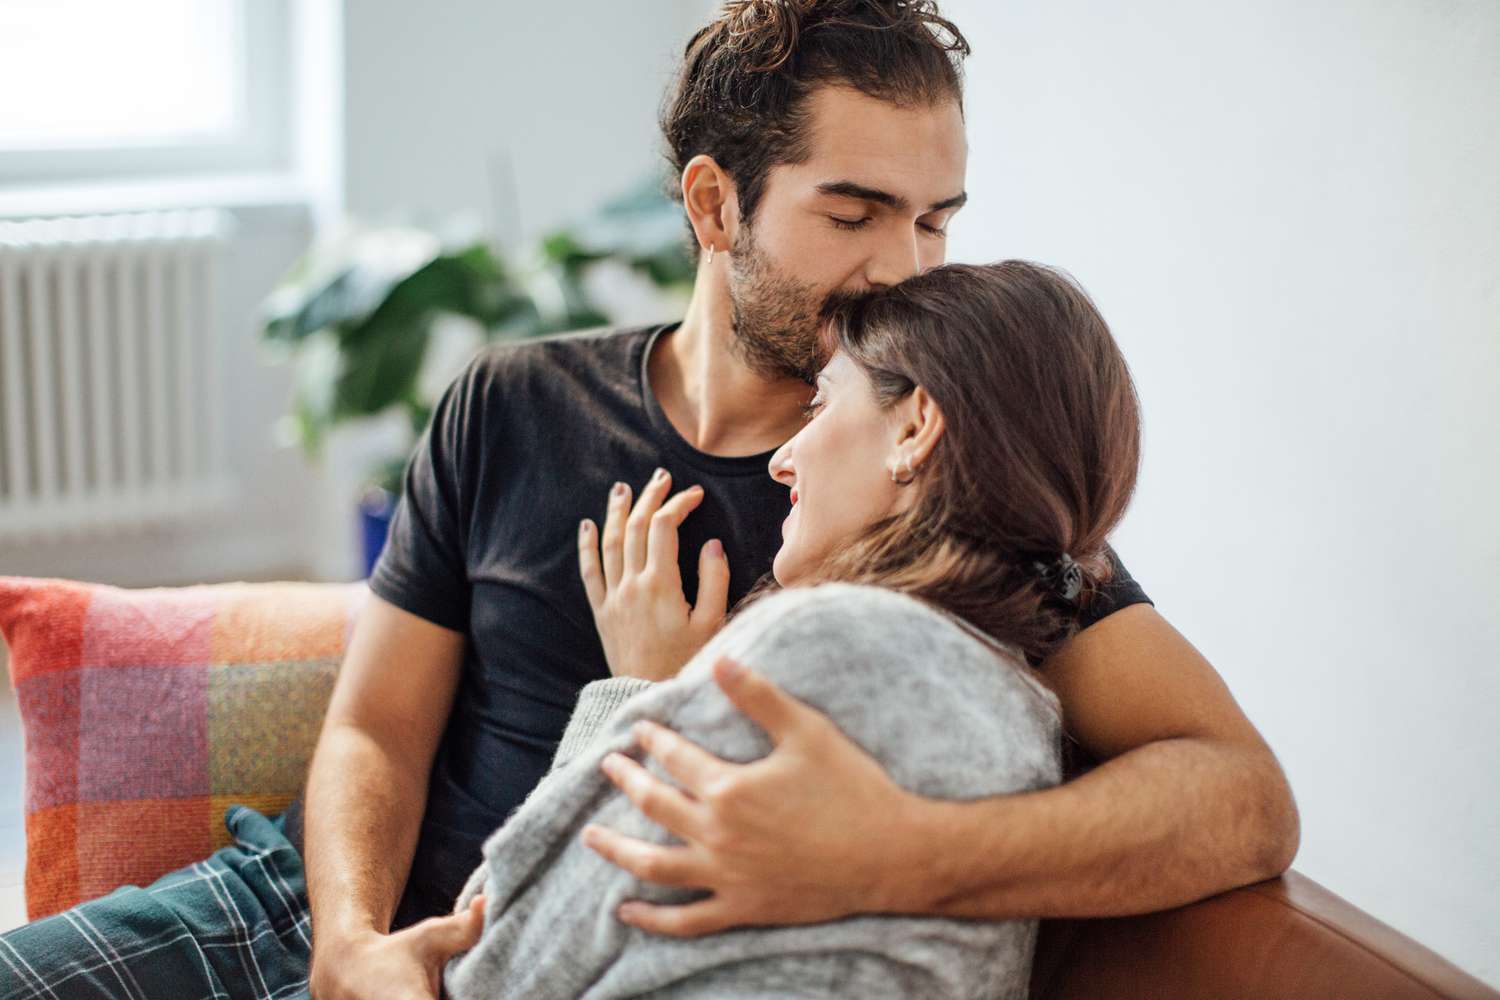 Young man embracing girlfriend while kissing on her forehead in living room at home